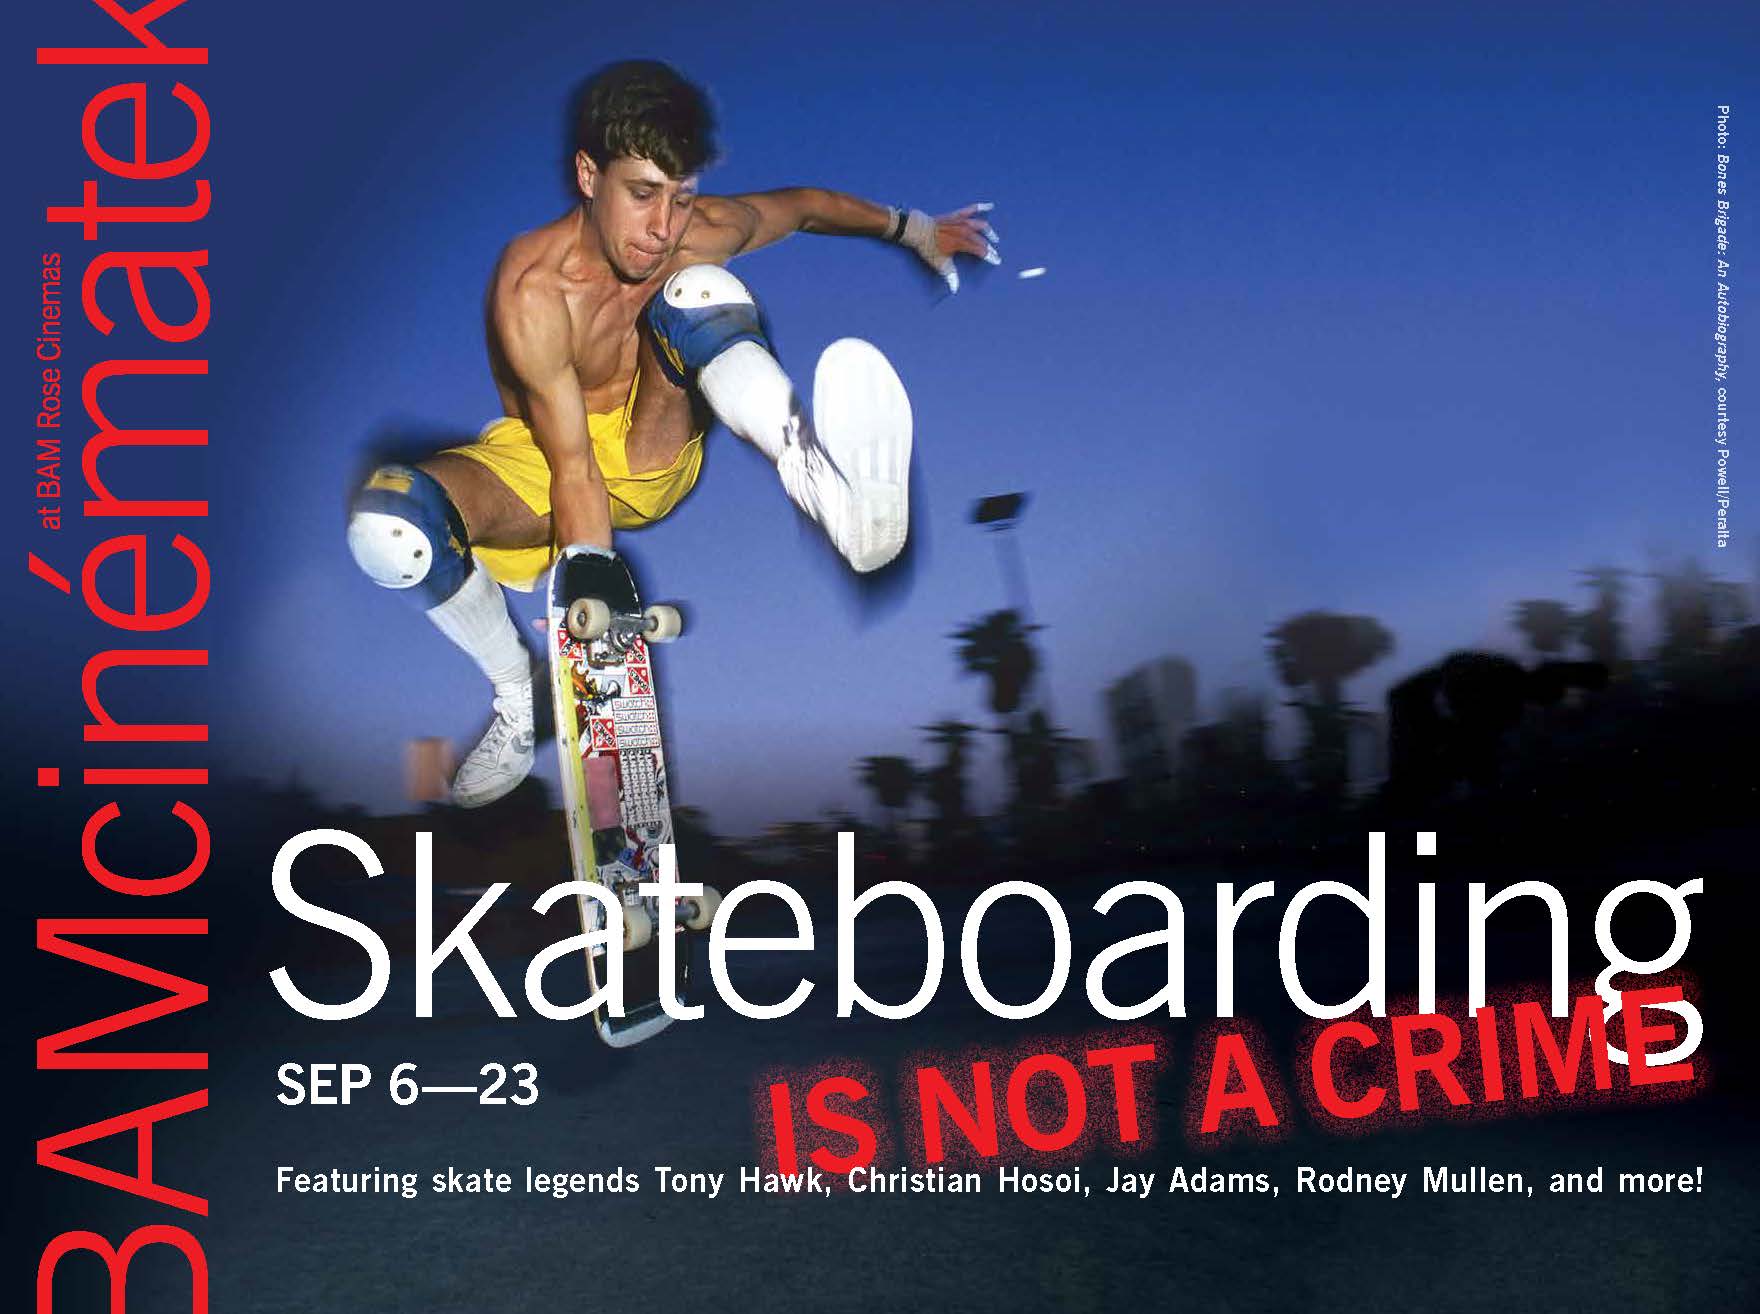 BAM: Skateboarding Is Not a Crime Film Series Playing Throughout September (2013)